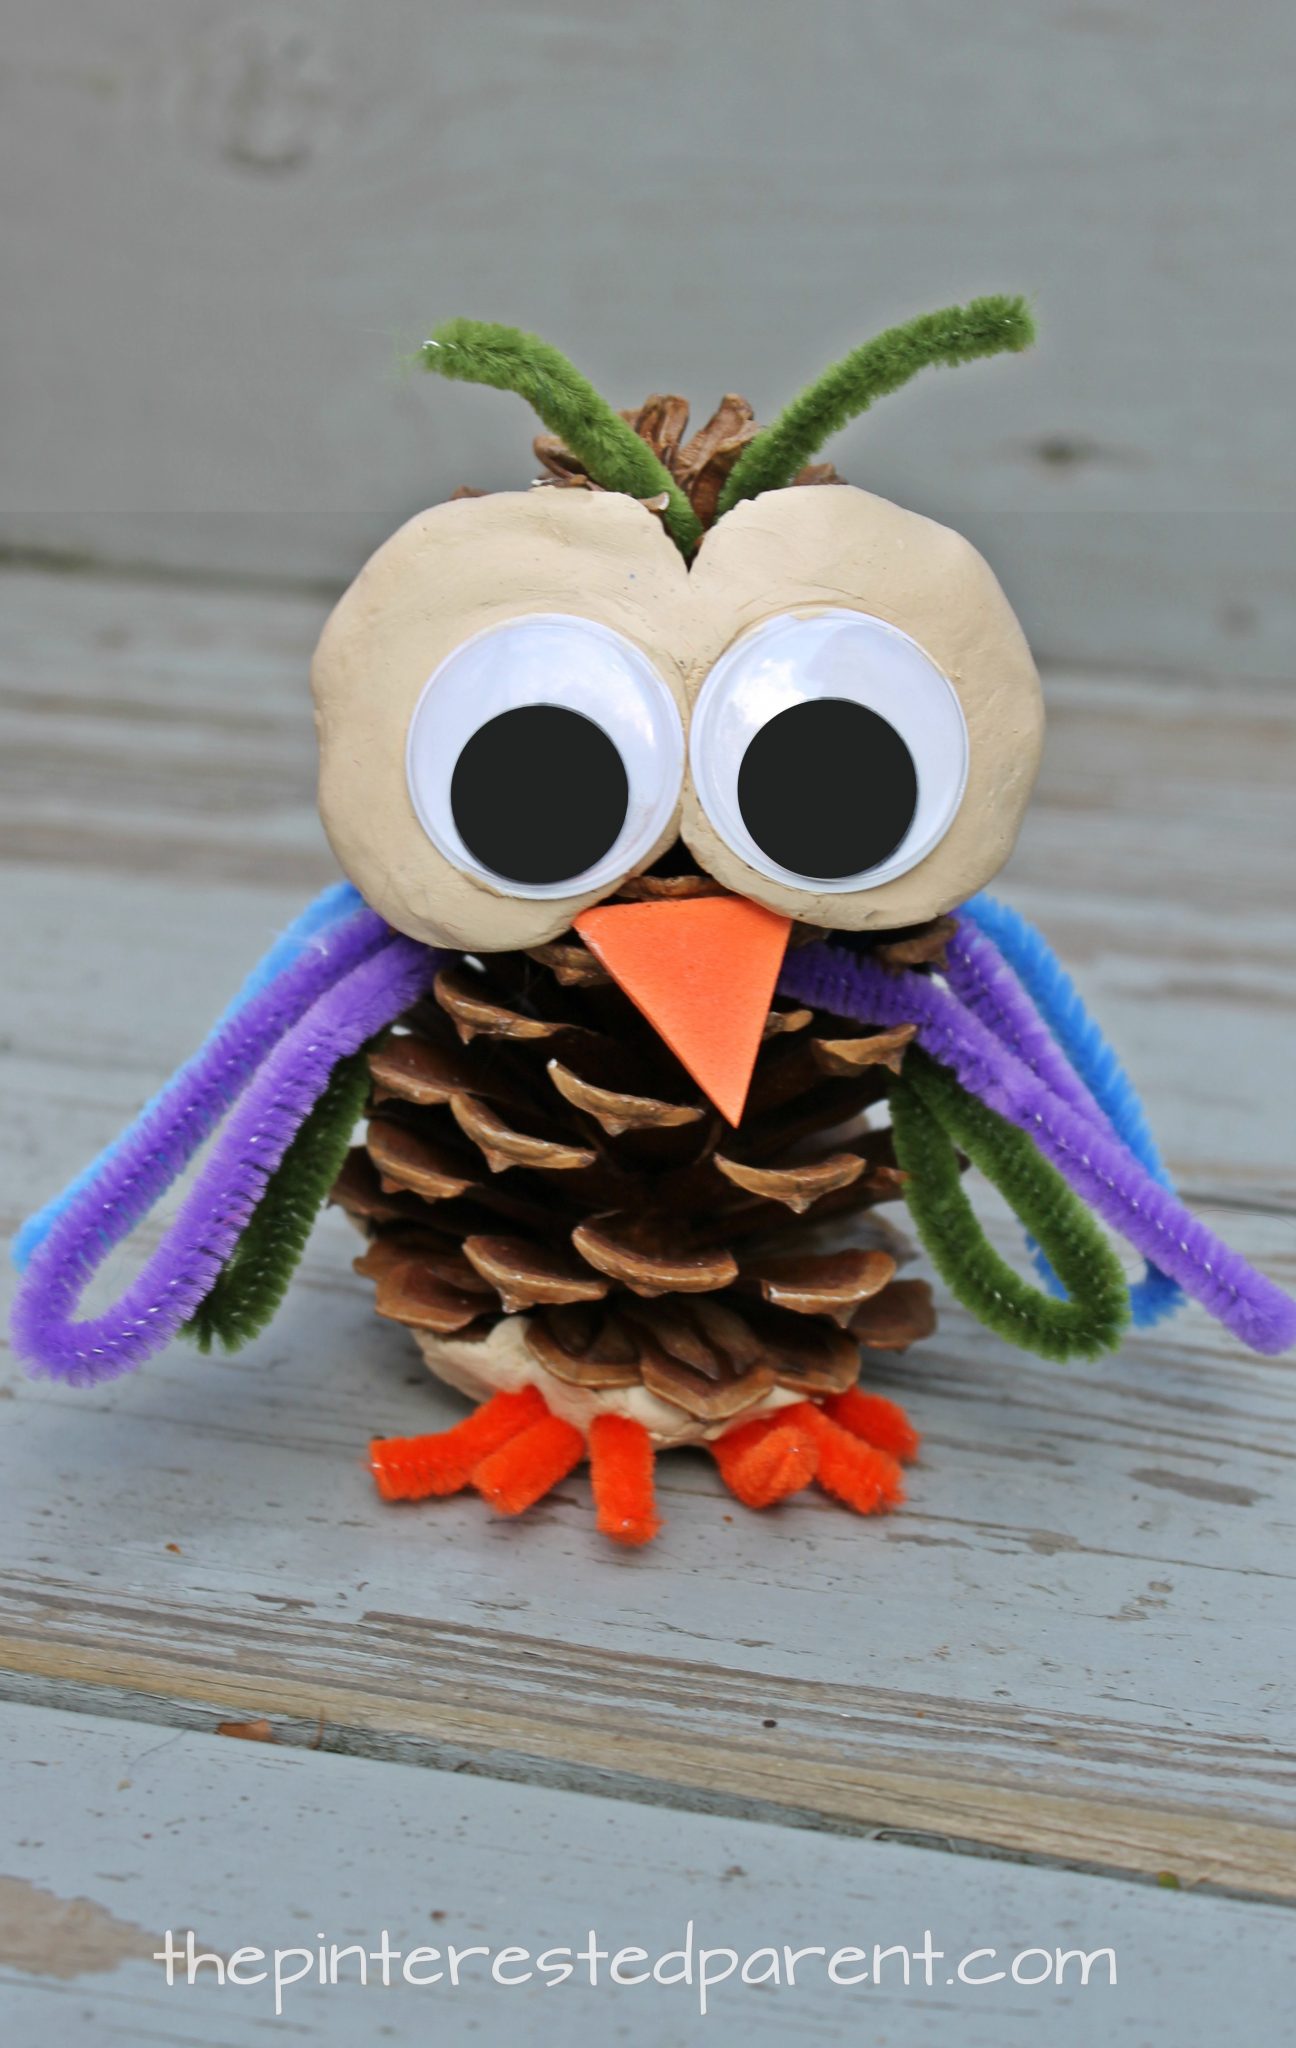 Pinecone and pipe cleaner animals. Check out our other pine cone animals. These are cute and easy to make. Use clay or play dough for this Owl craft for kids. Fall or autumn arts and crafts. Nature